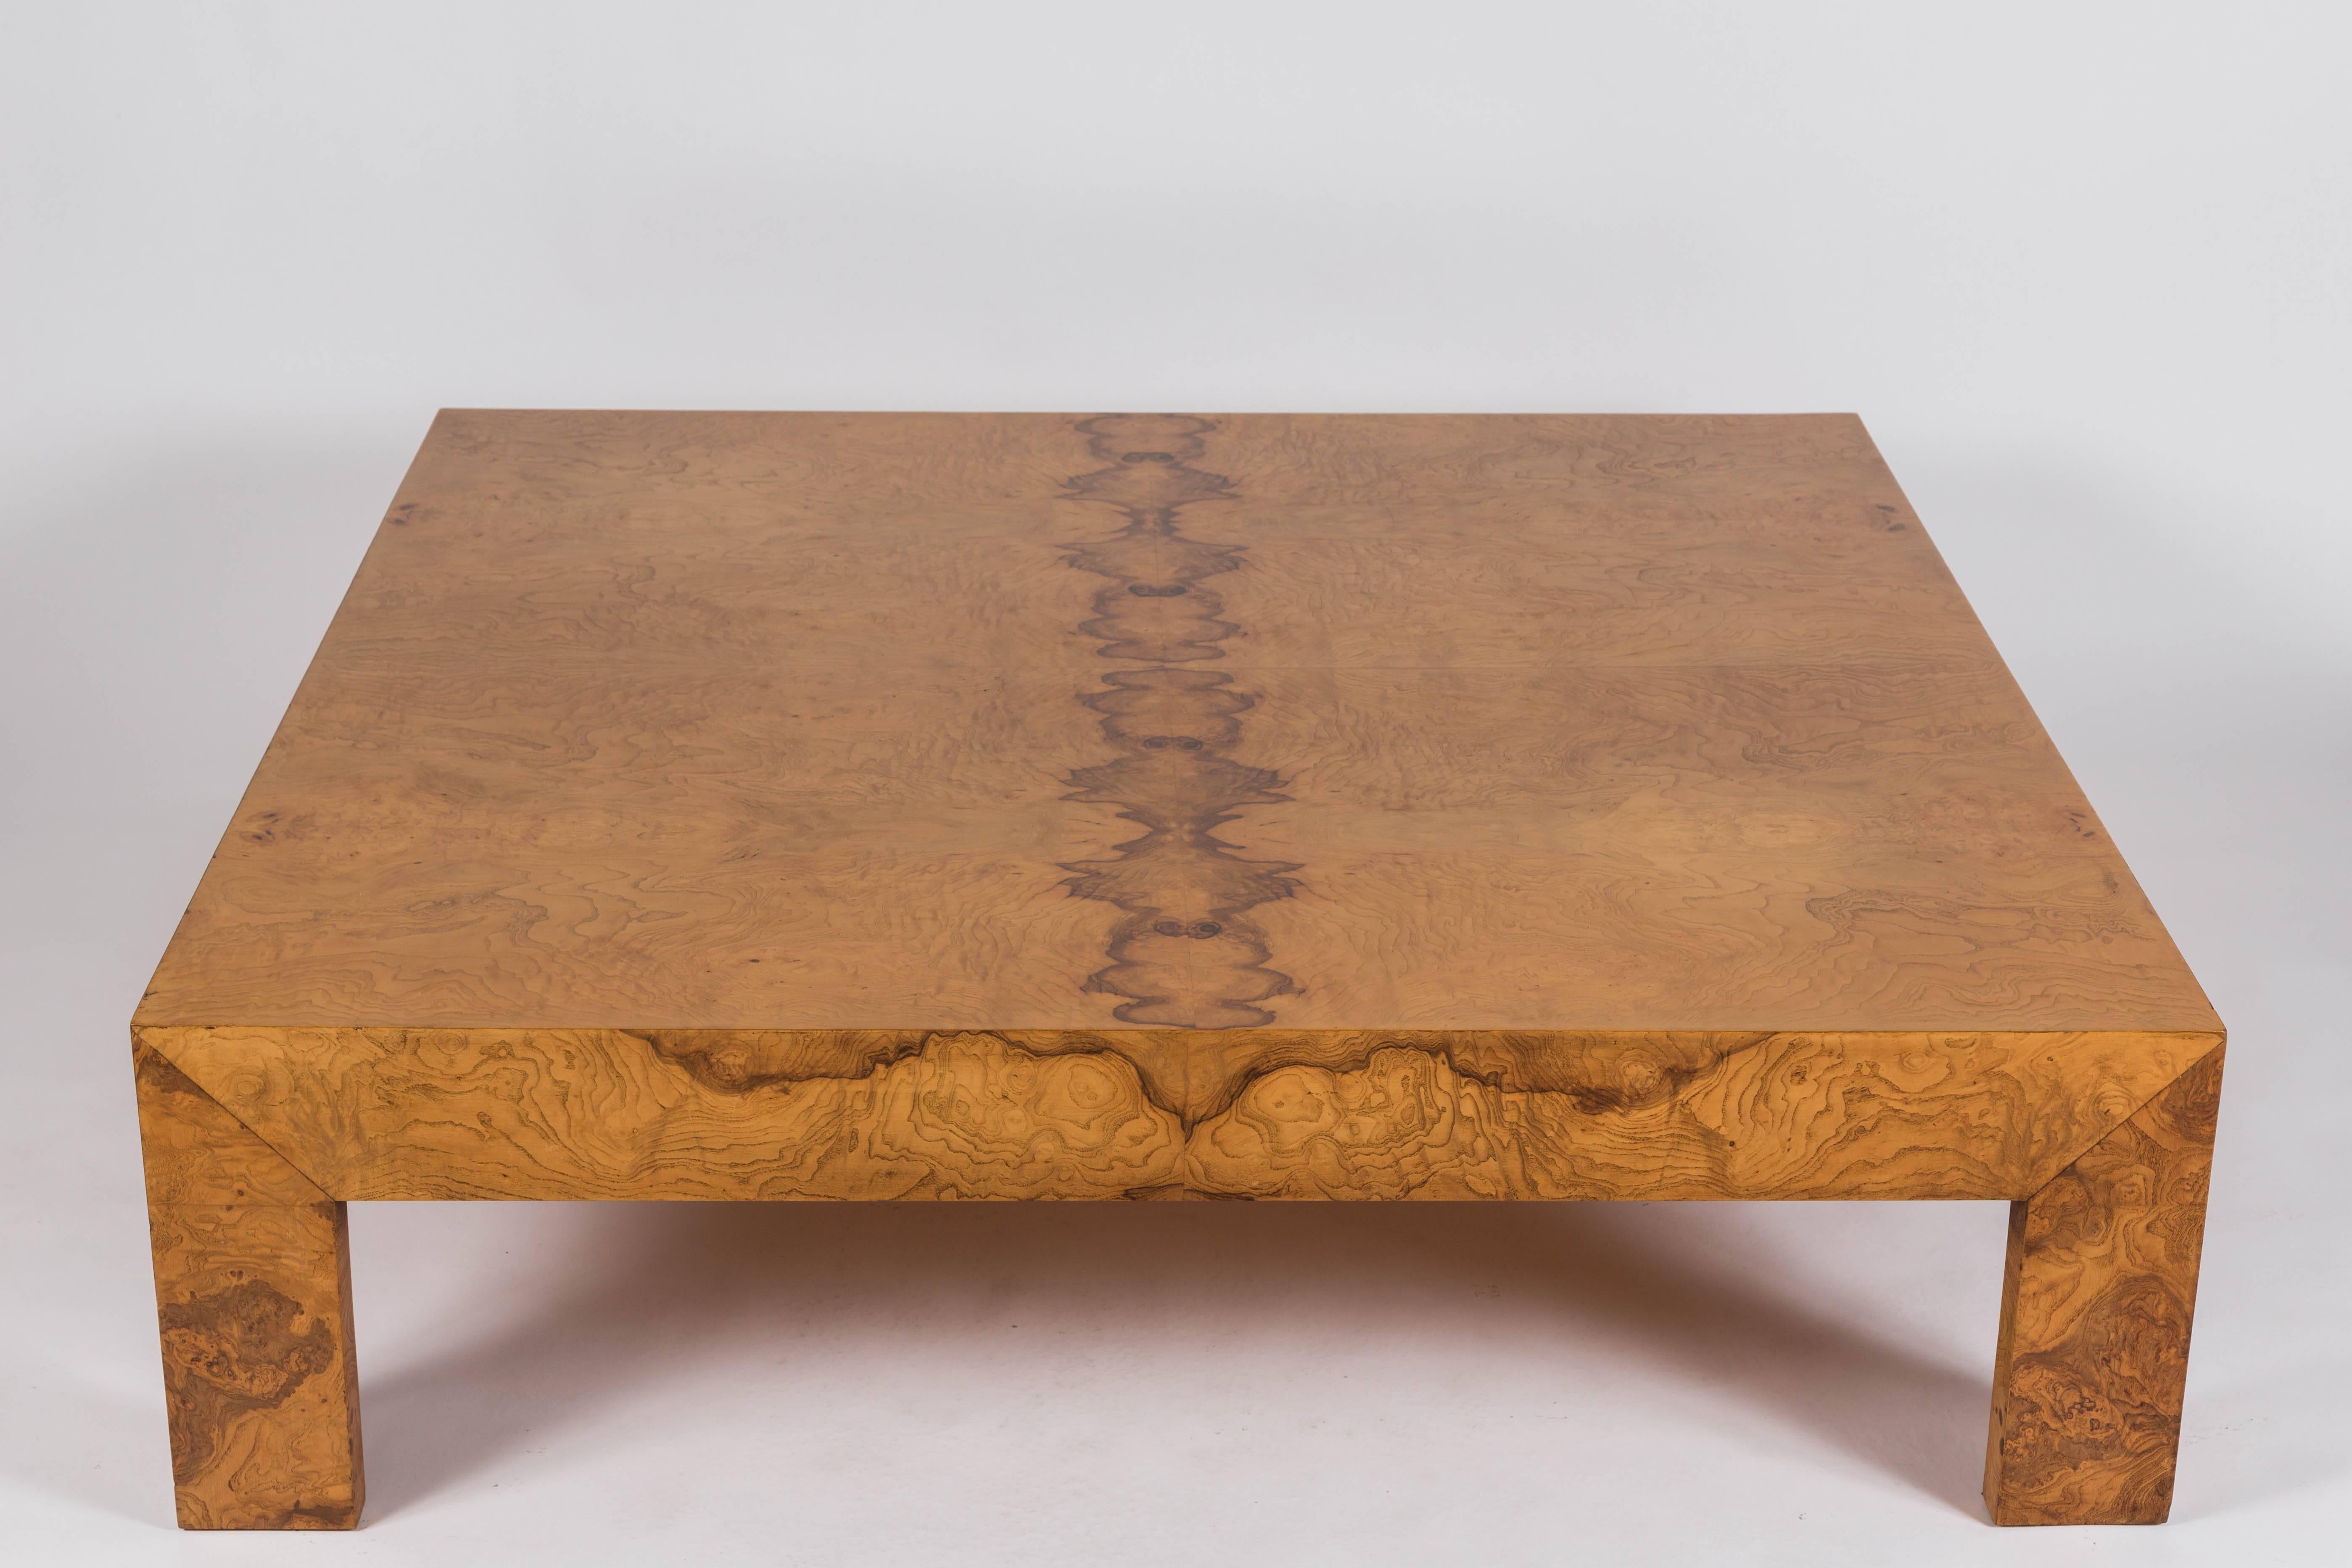 Beautiful low profile cocktail table constructed with book match burl wood veneers.